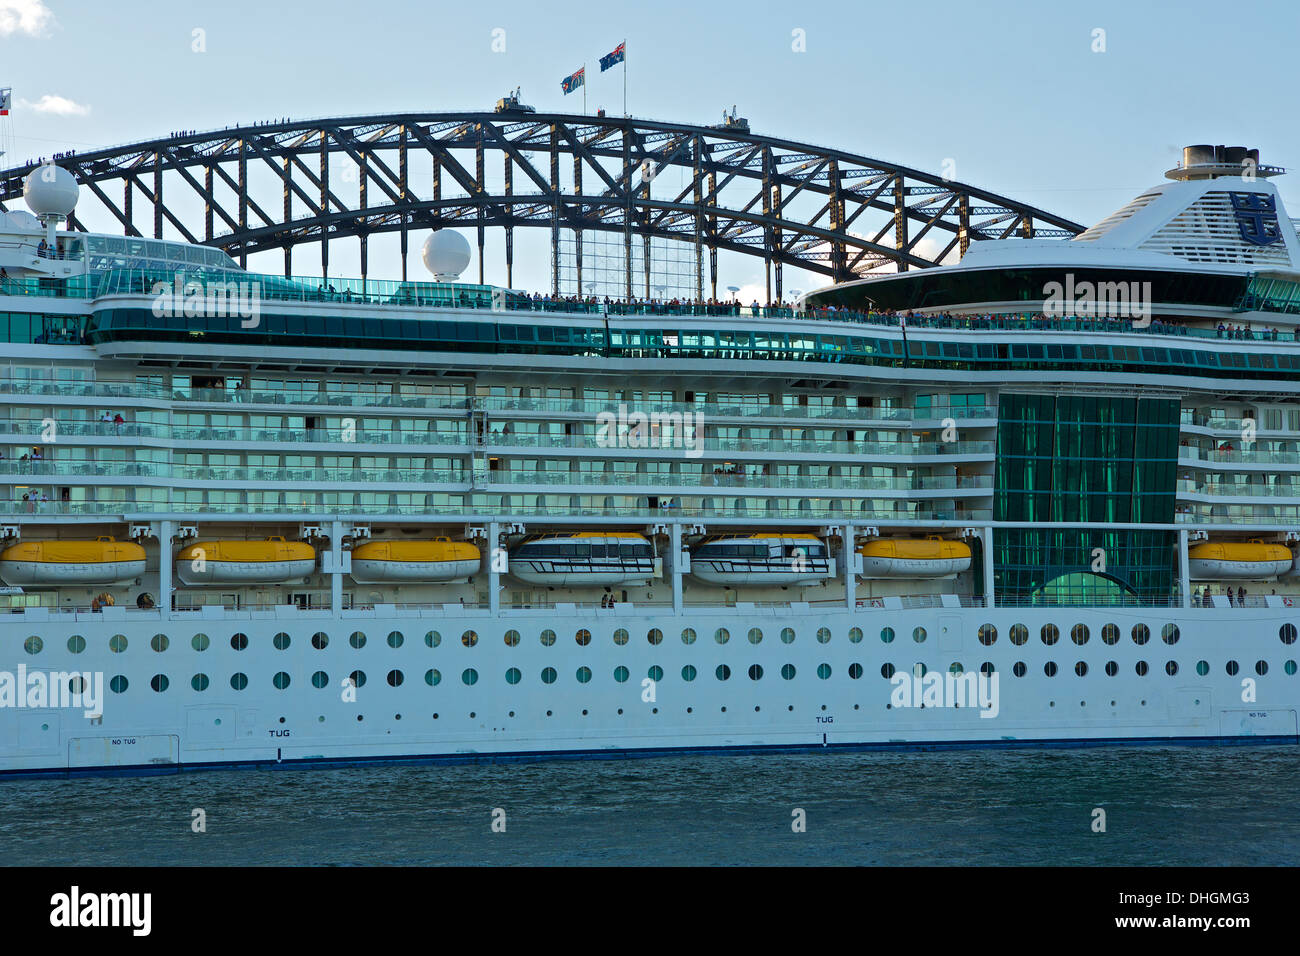 Cruise Ship Port Hole High Resolution Stock Photography and Images - Alamy